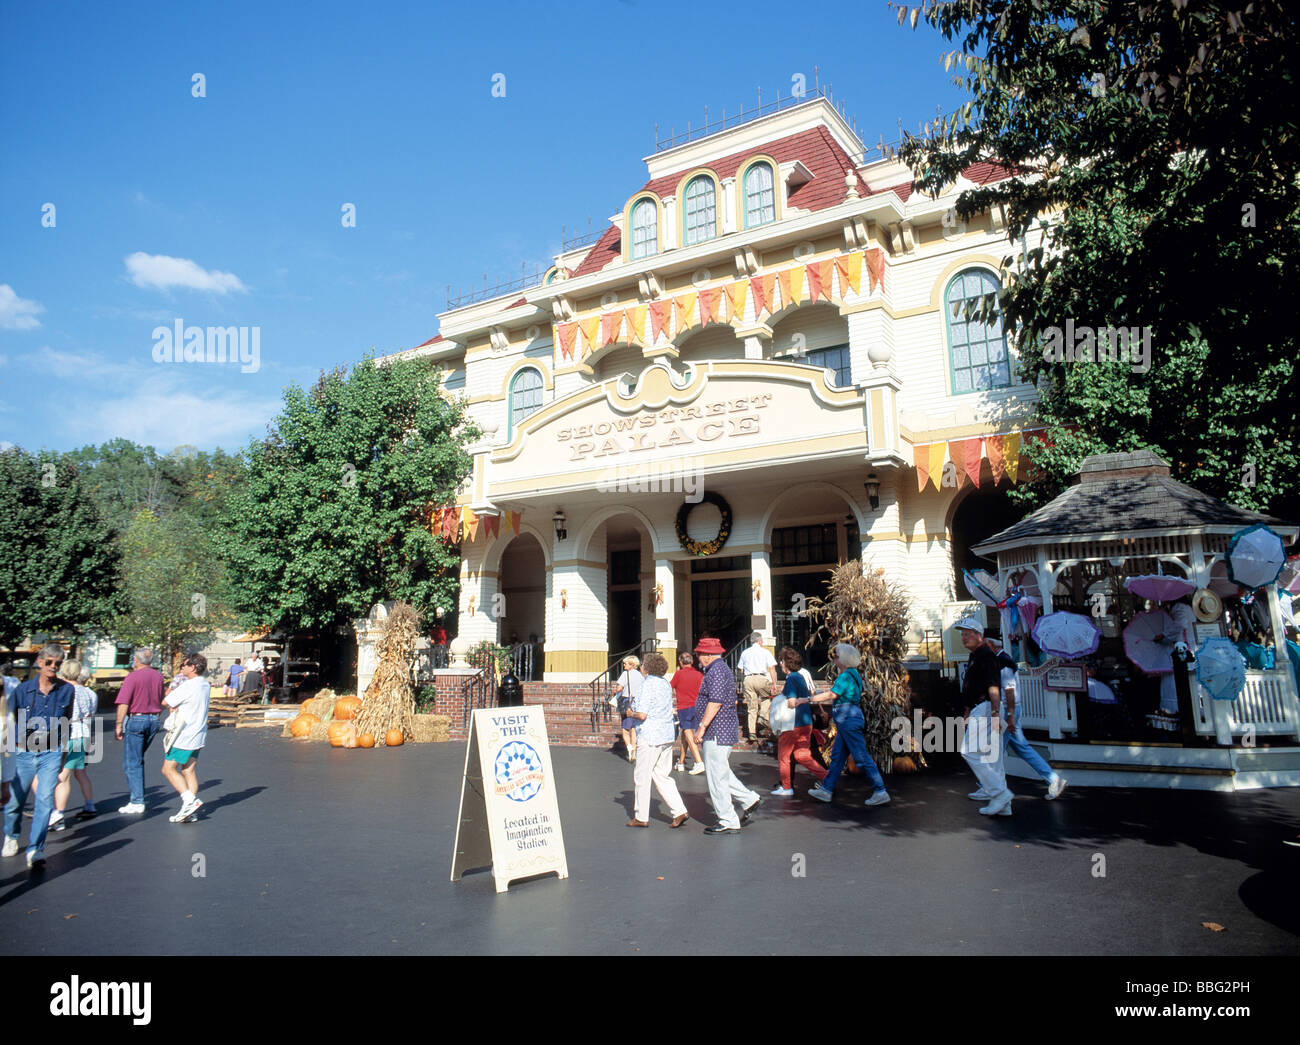 Von Dolly Parton Dollywood Theme Park am Pigeon Force, in Tennessee, USA Stockfoto